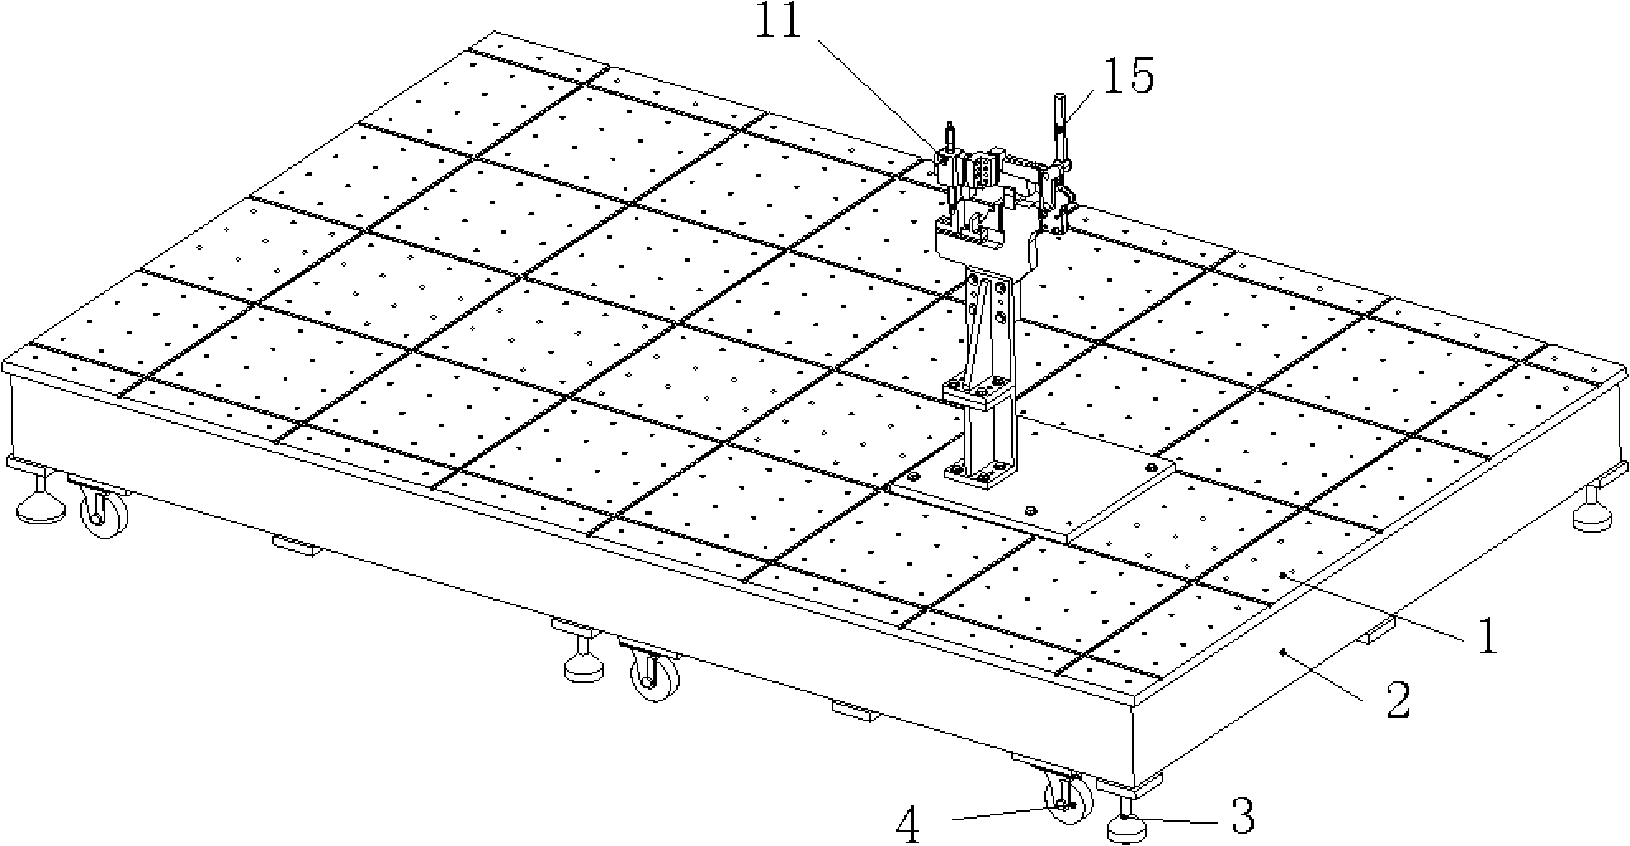 Modular design method and structure of welding fixture for trial-manufacture sample vehicles